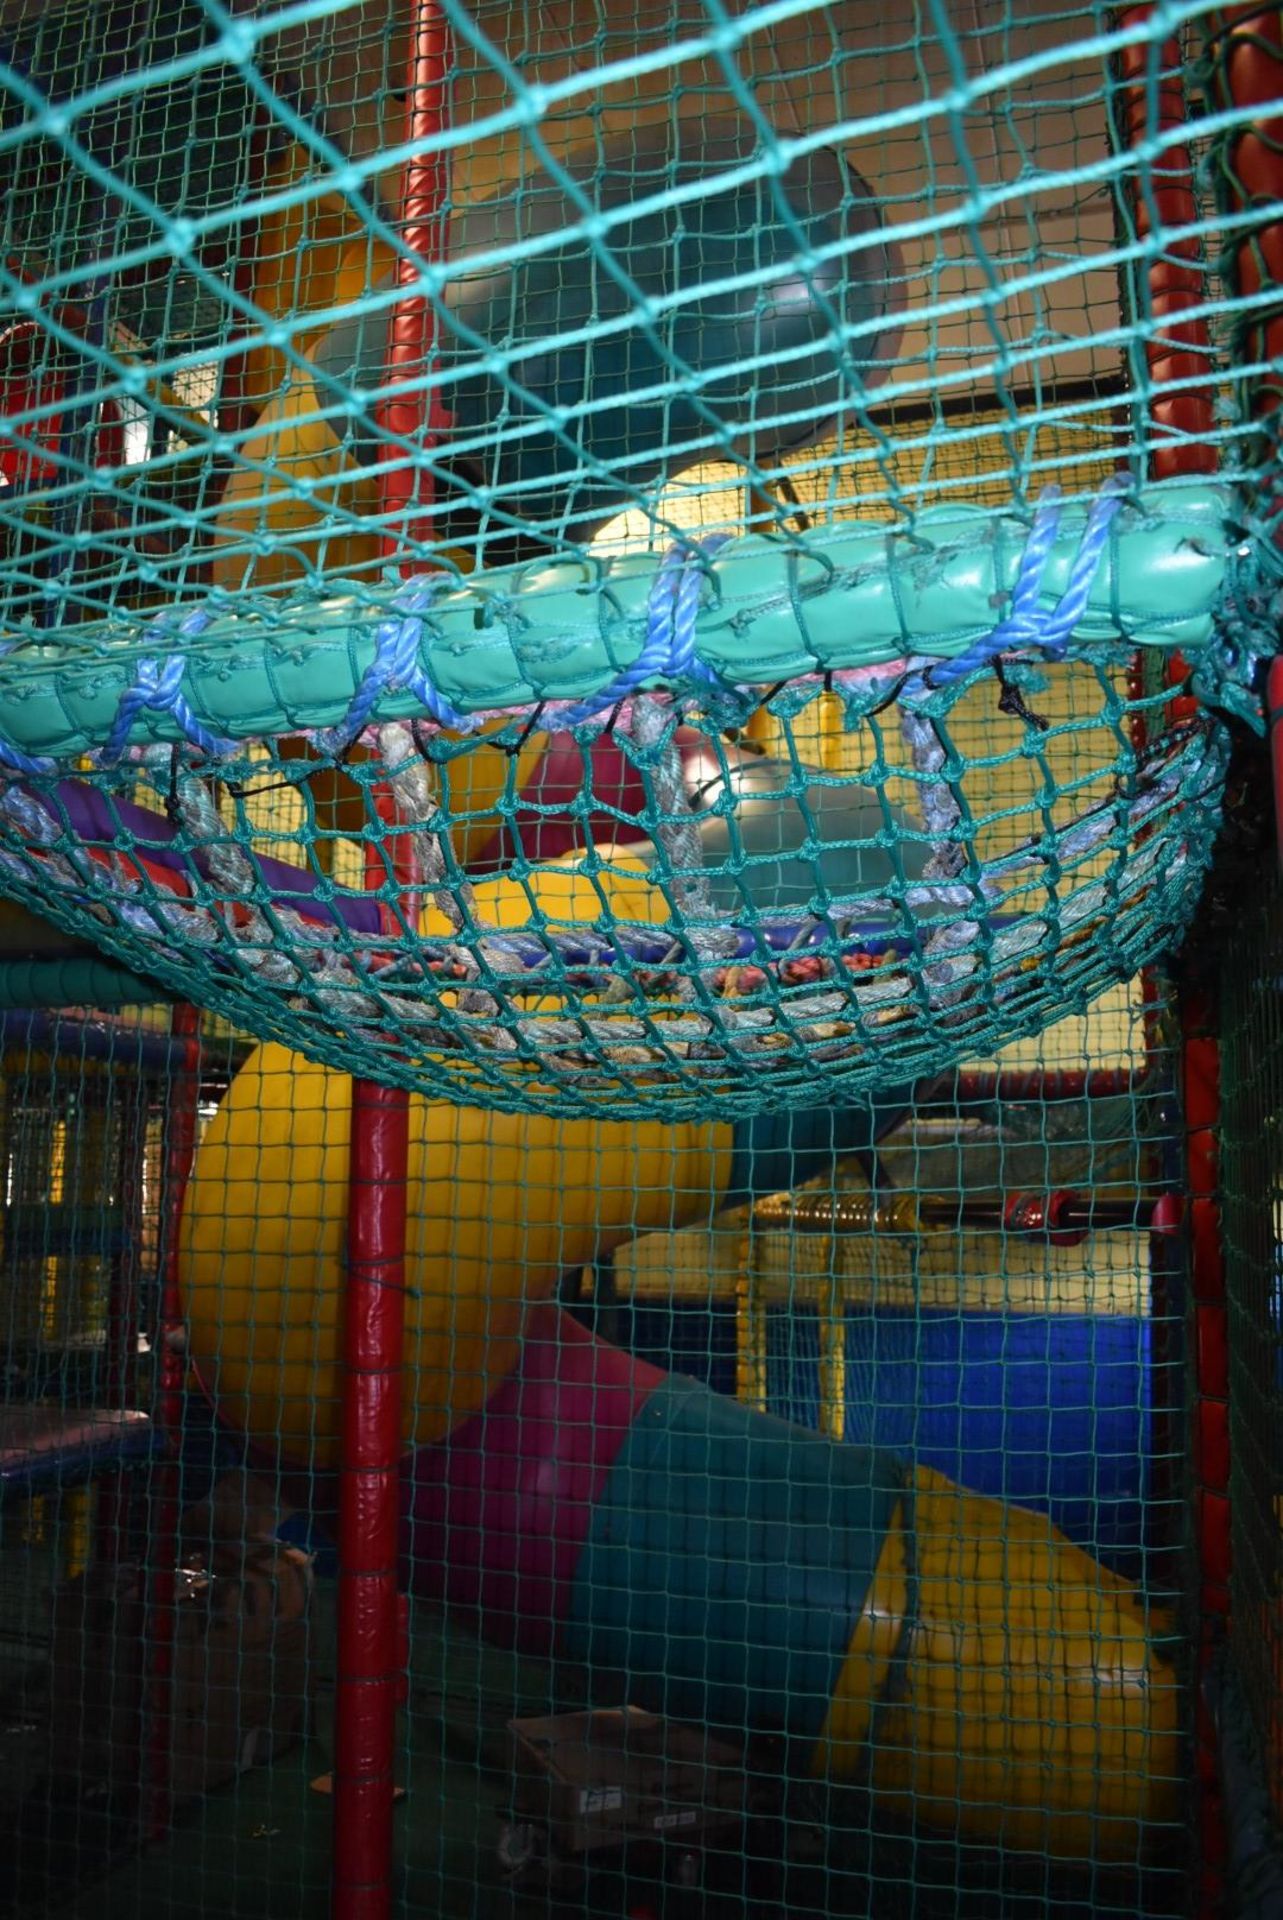 Bramleys Big Adventure Playground - Giant Action-Packed Playcentre With Slides, Zip Line Swings, - Image 91 of 99